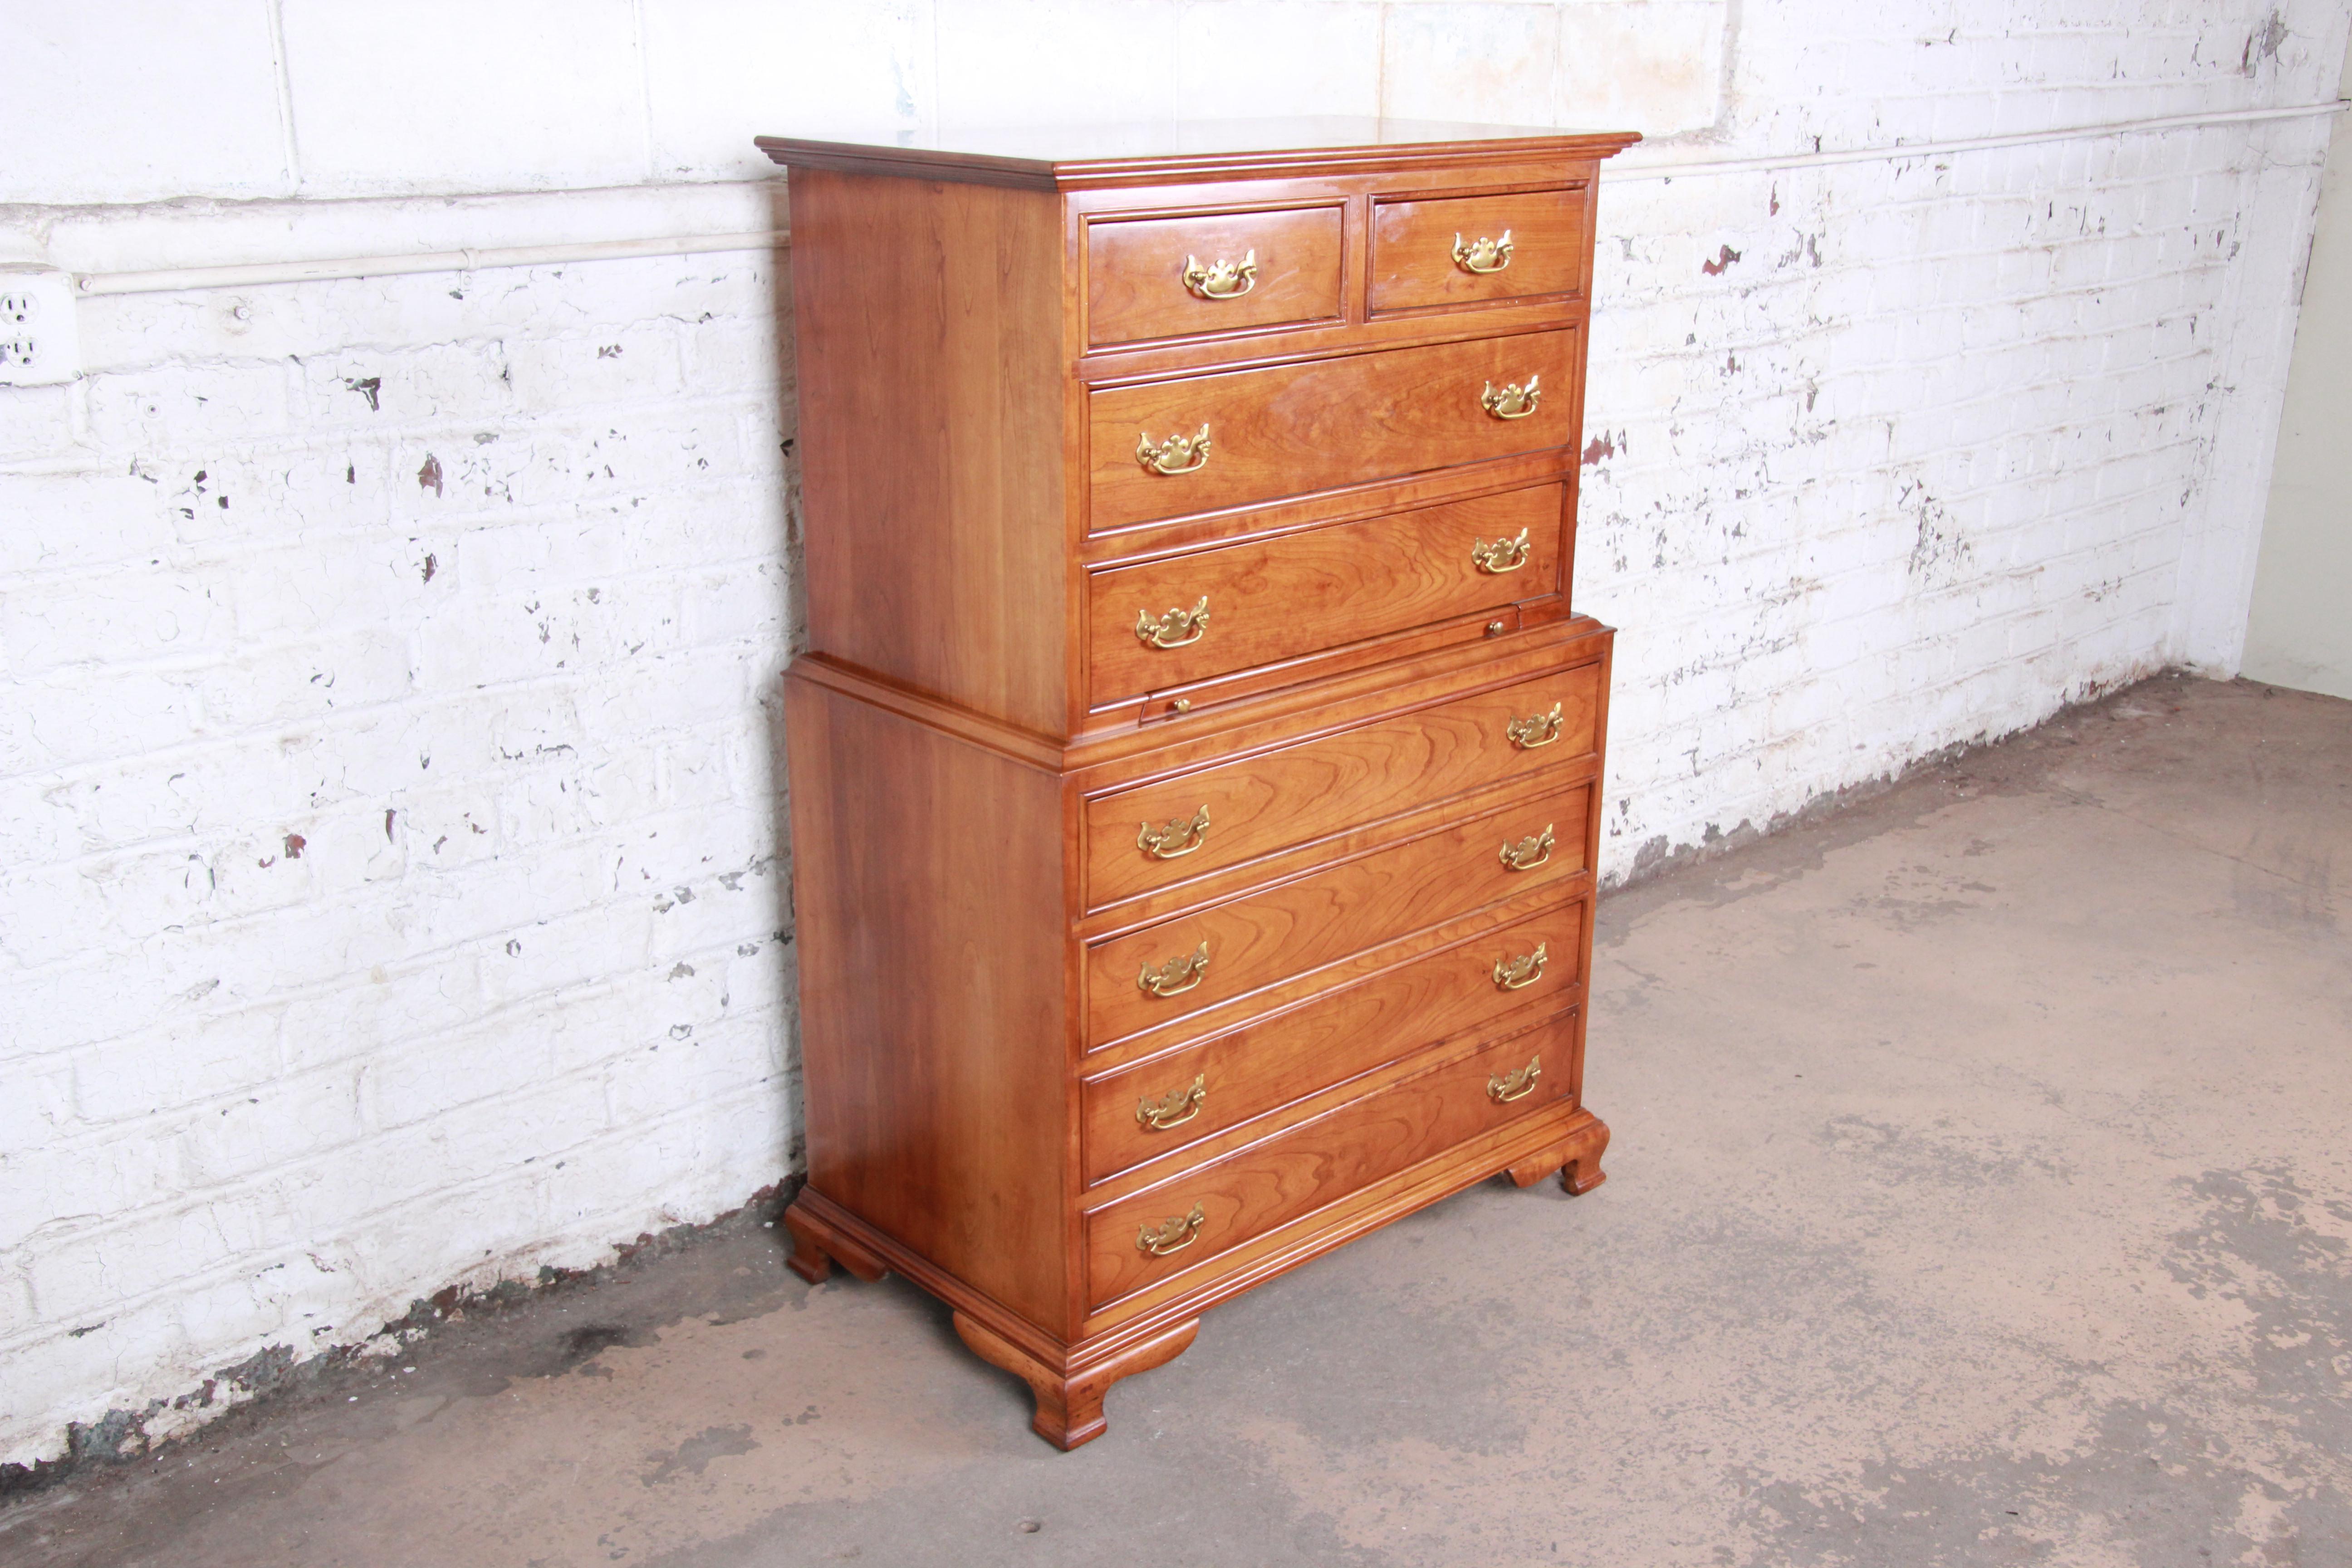 An exceptional Chippendale style highboy chest on chest dresser by L. & J.G. Stickley. The chest features gorgeous wood grain and solid cherrywood construction. It offers ample storage, with eight dovetailed drawers and a pull-out tablet. Brass